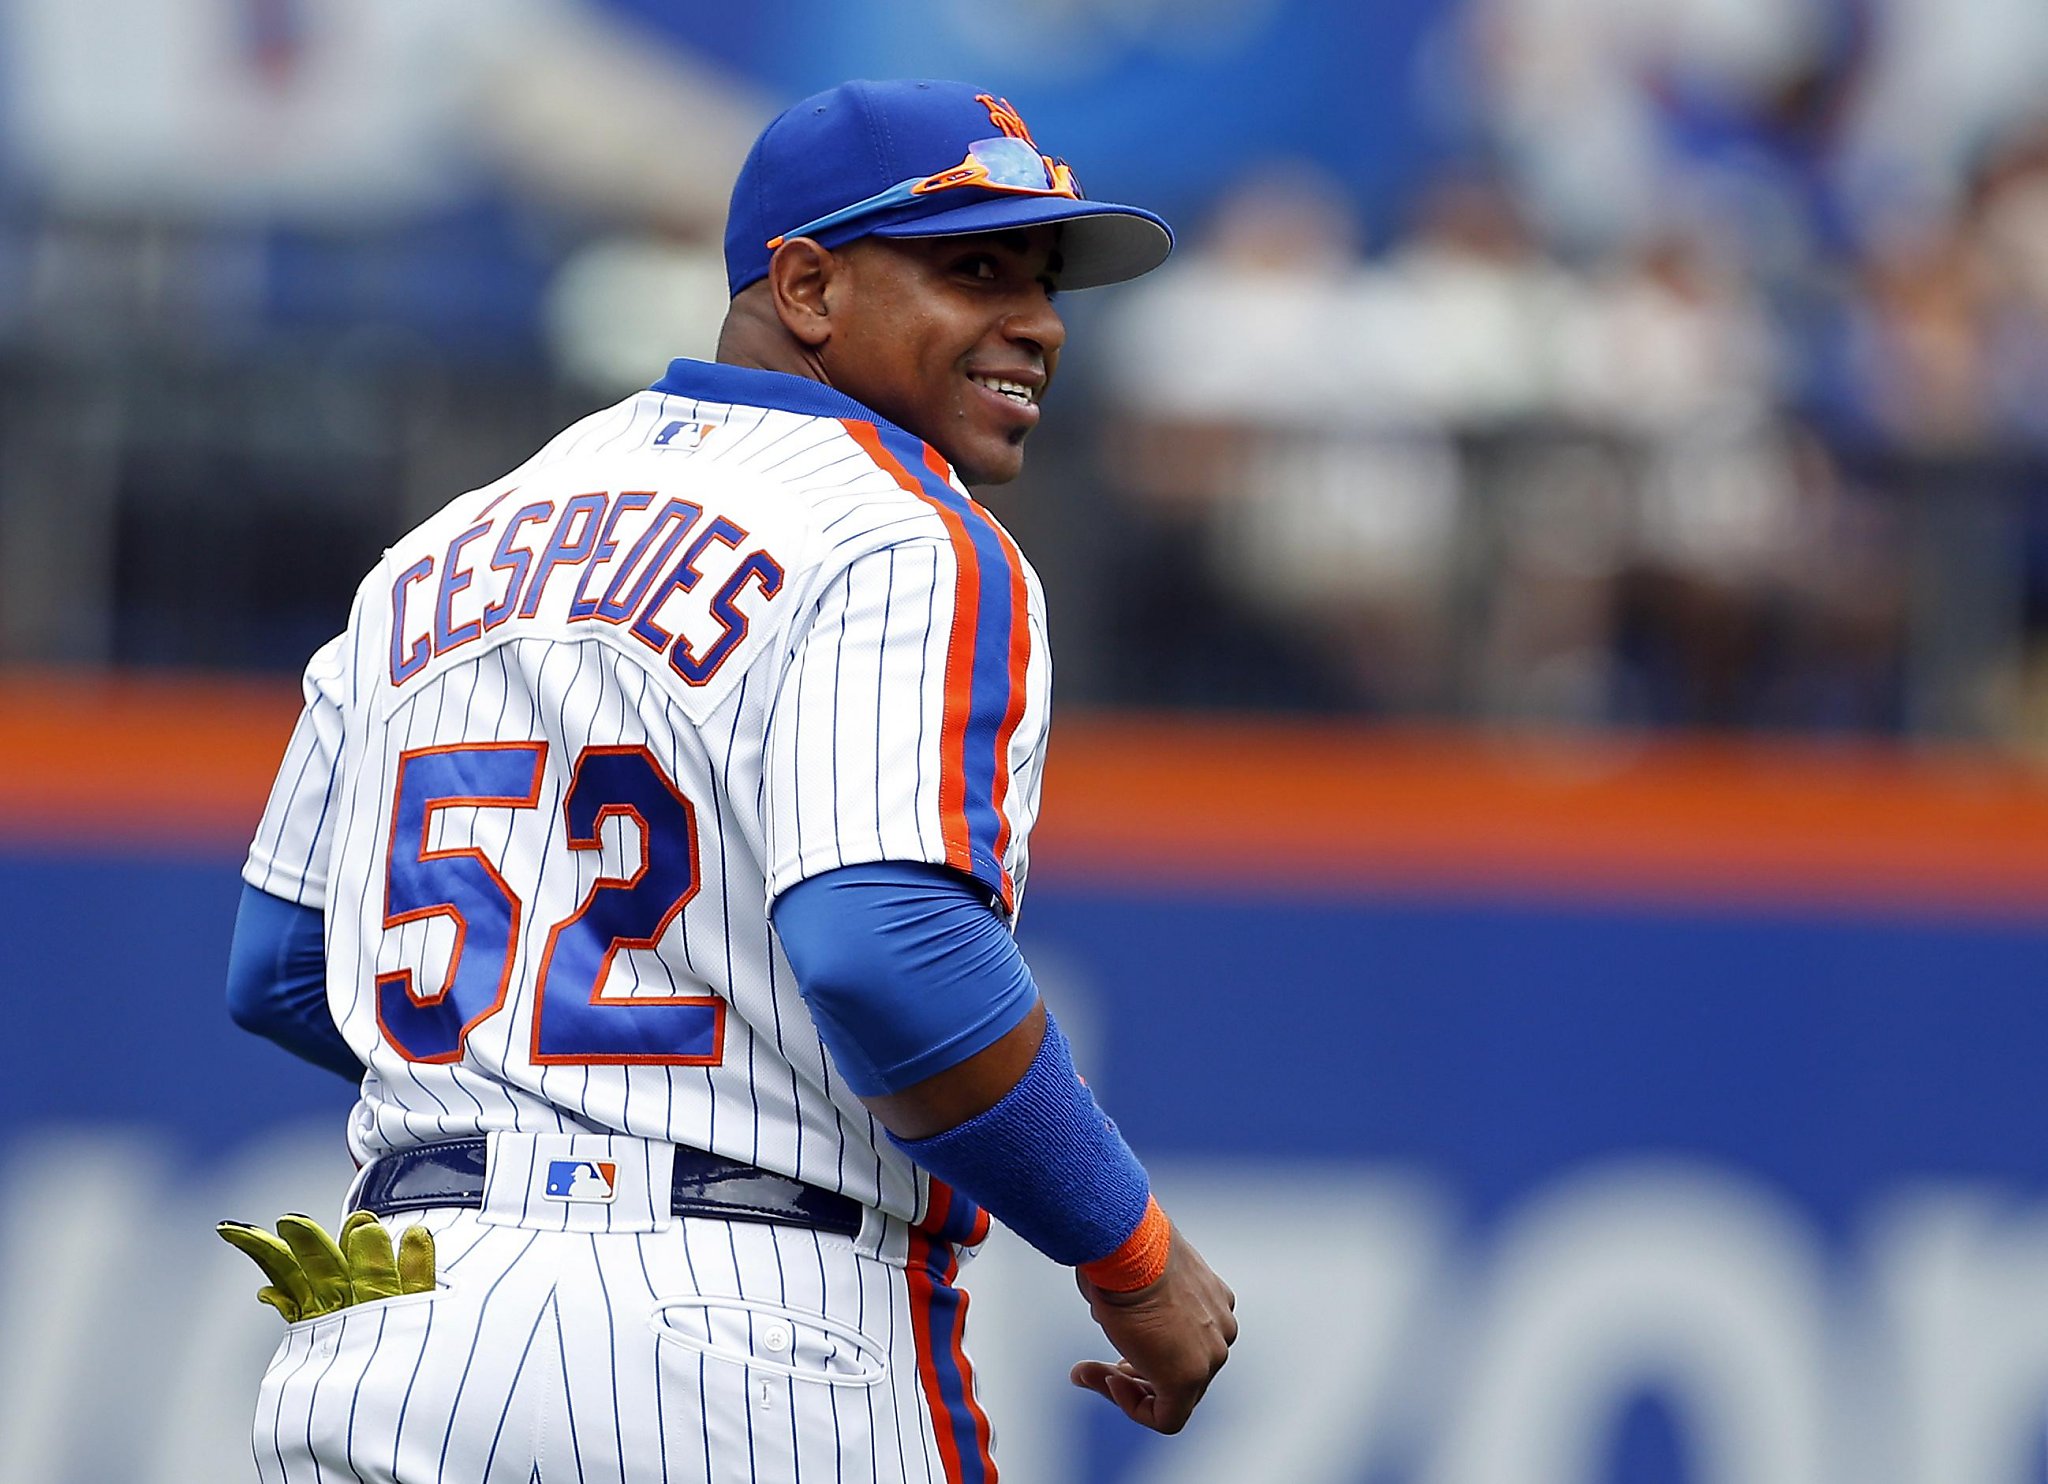 Yoenis Cespedes Trading Cards: Values, Tracking & Hot Deals